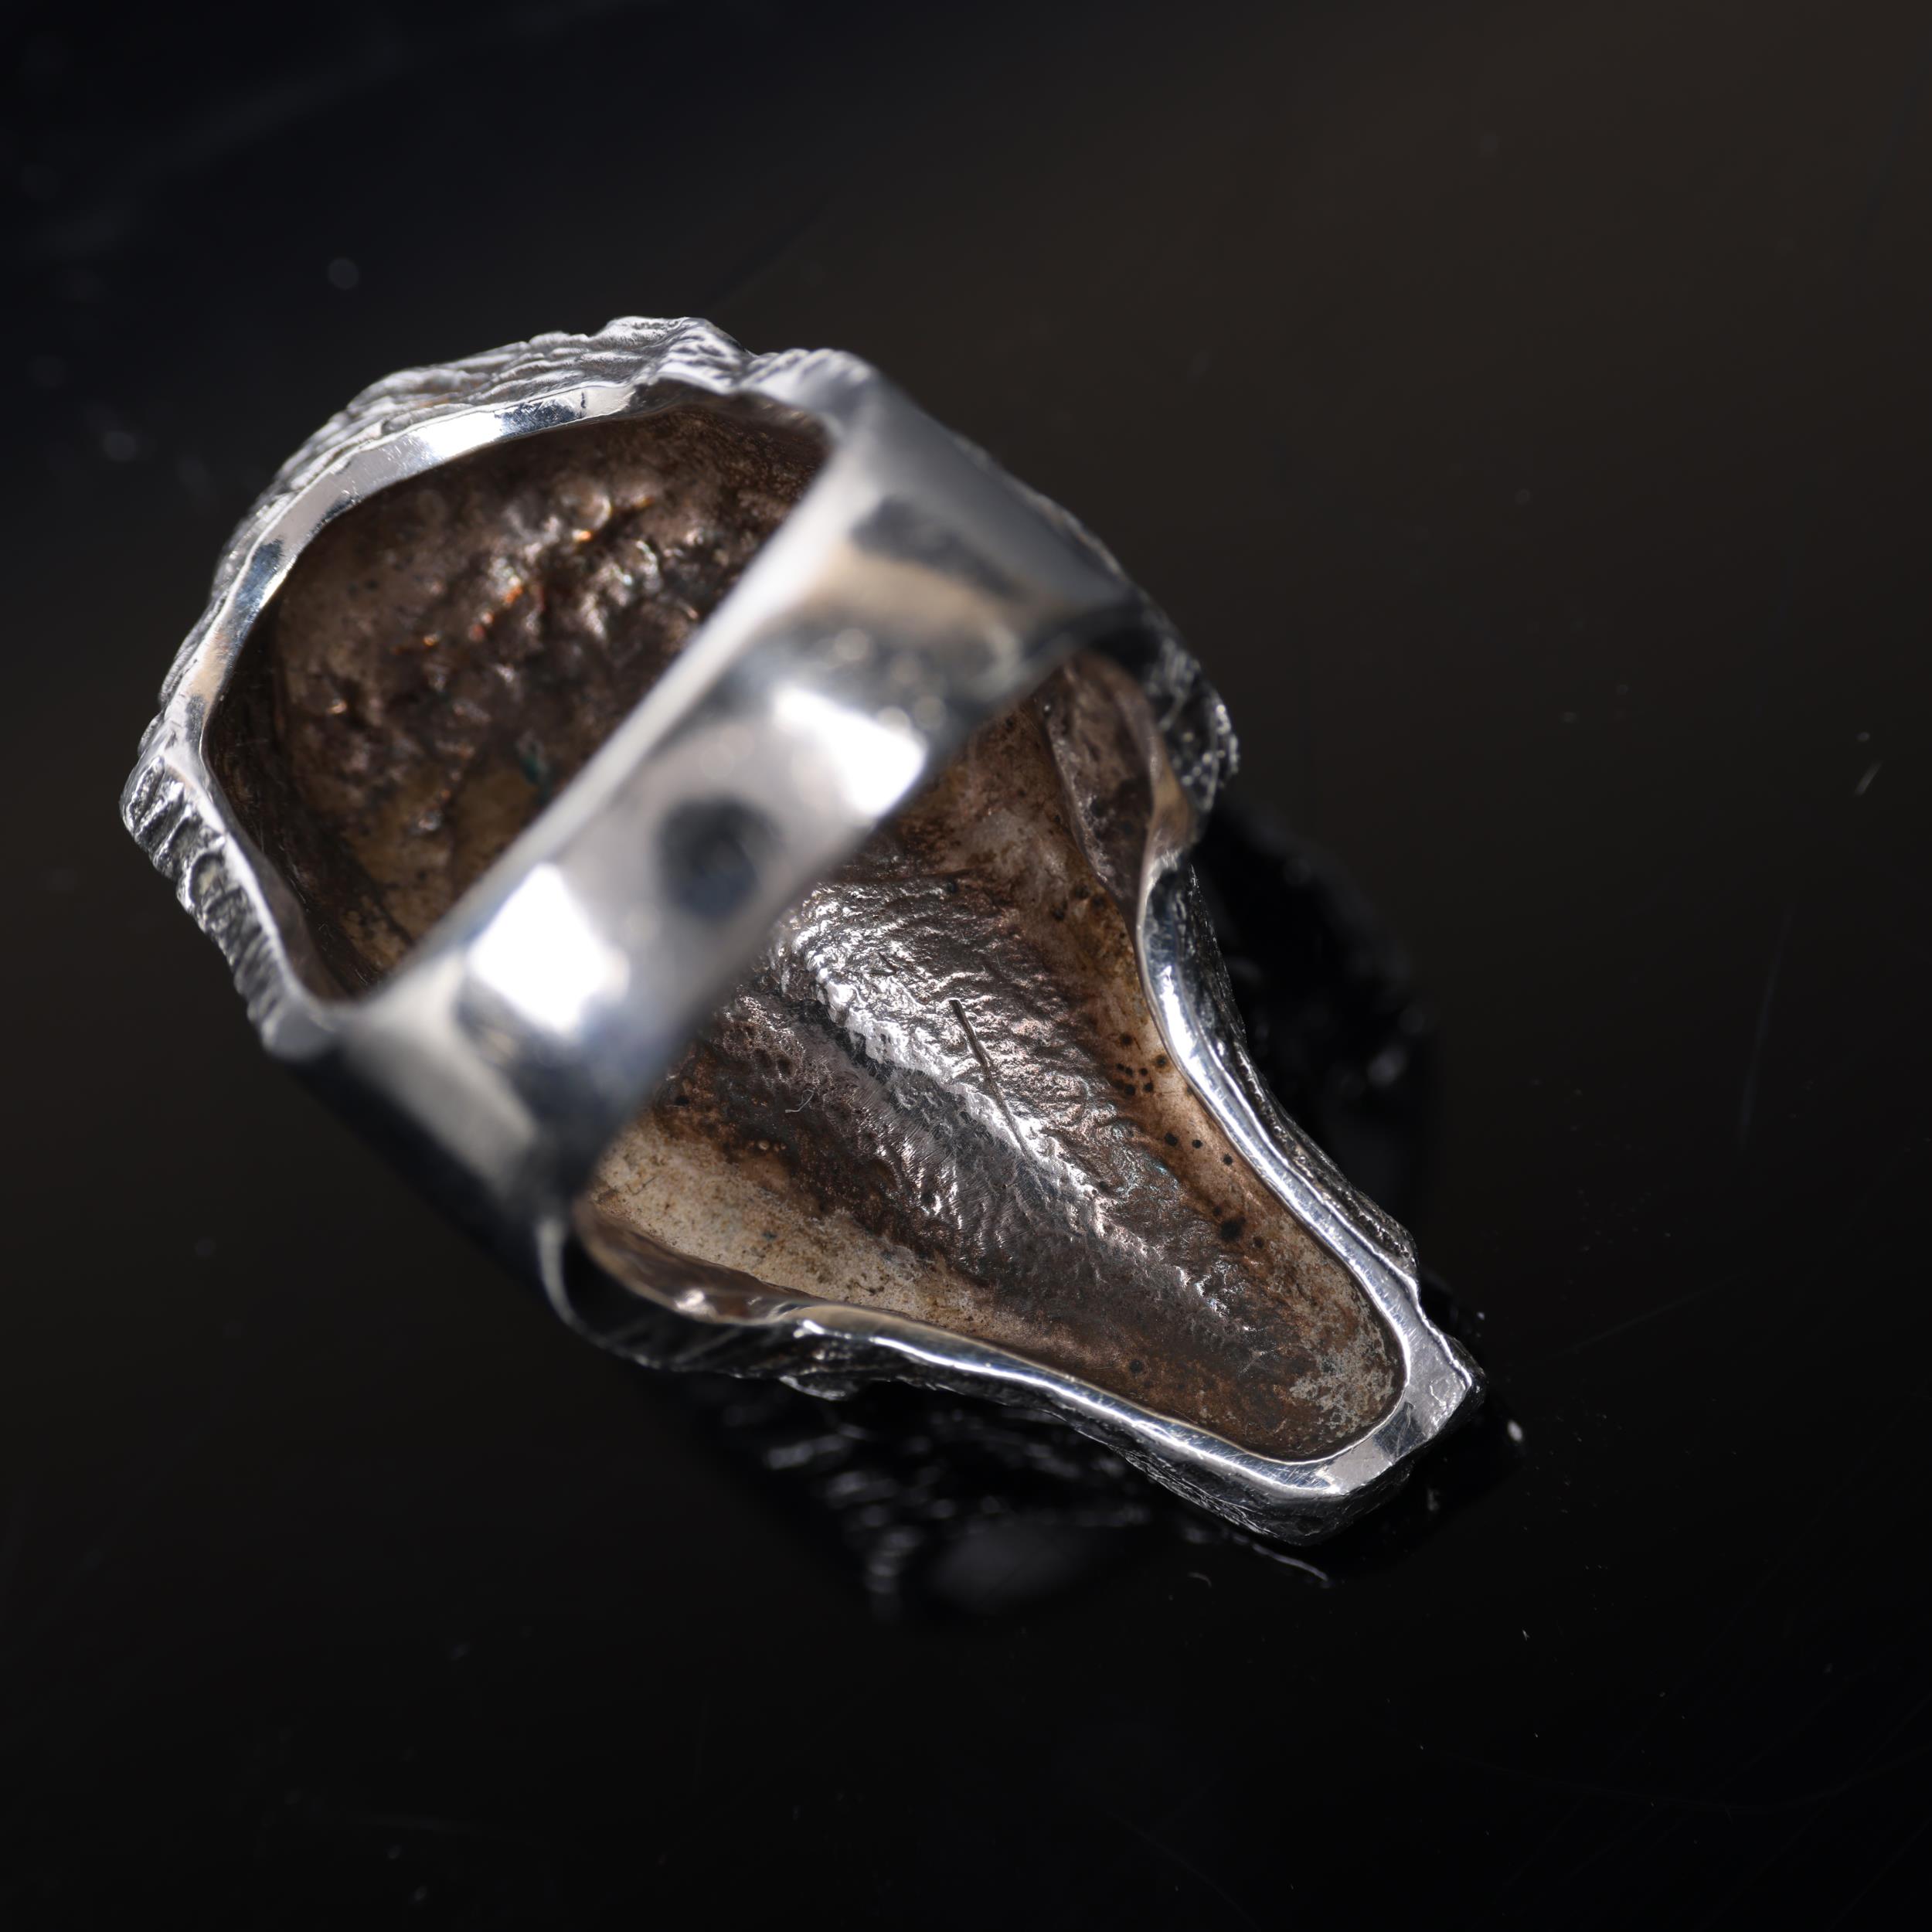 KNUD V ANDERSEN for ANTON MICHELSEN - a Danish brutalist sterling silver abstract ring, setting - Image 3 of 4